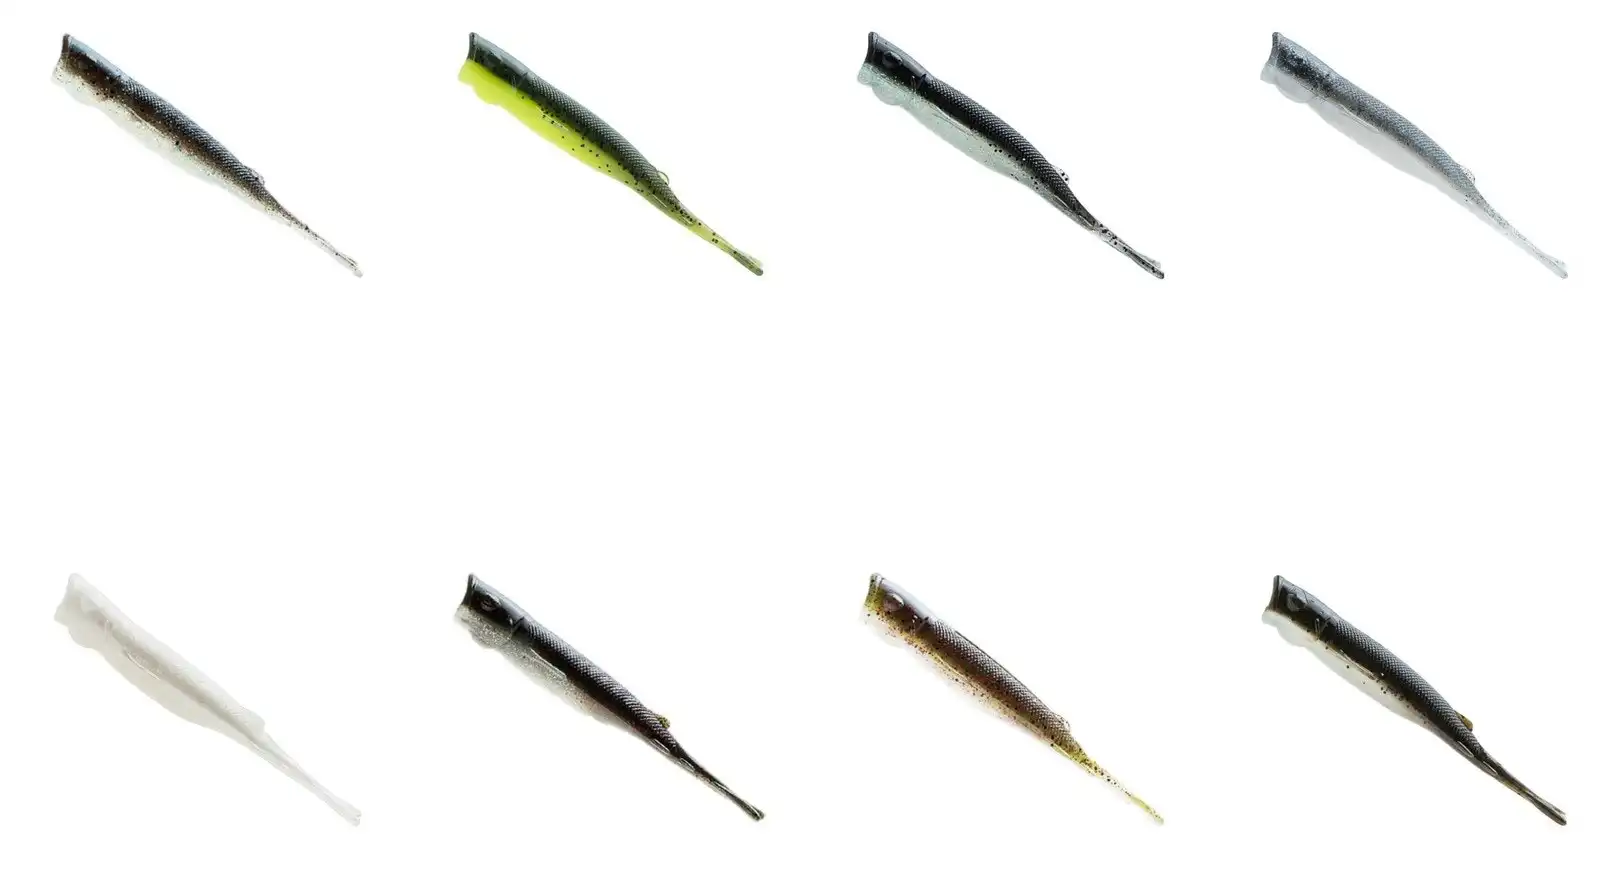 Zman 5 Inch Pop ShadZ Soft Plastic Lures - 3 Pack of Z Man Soft Plastic Lures